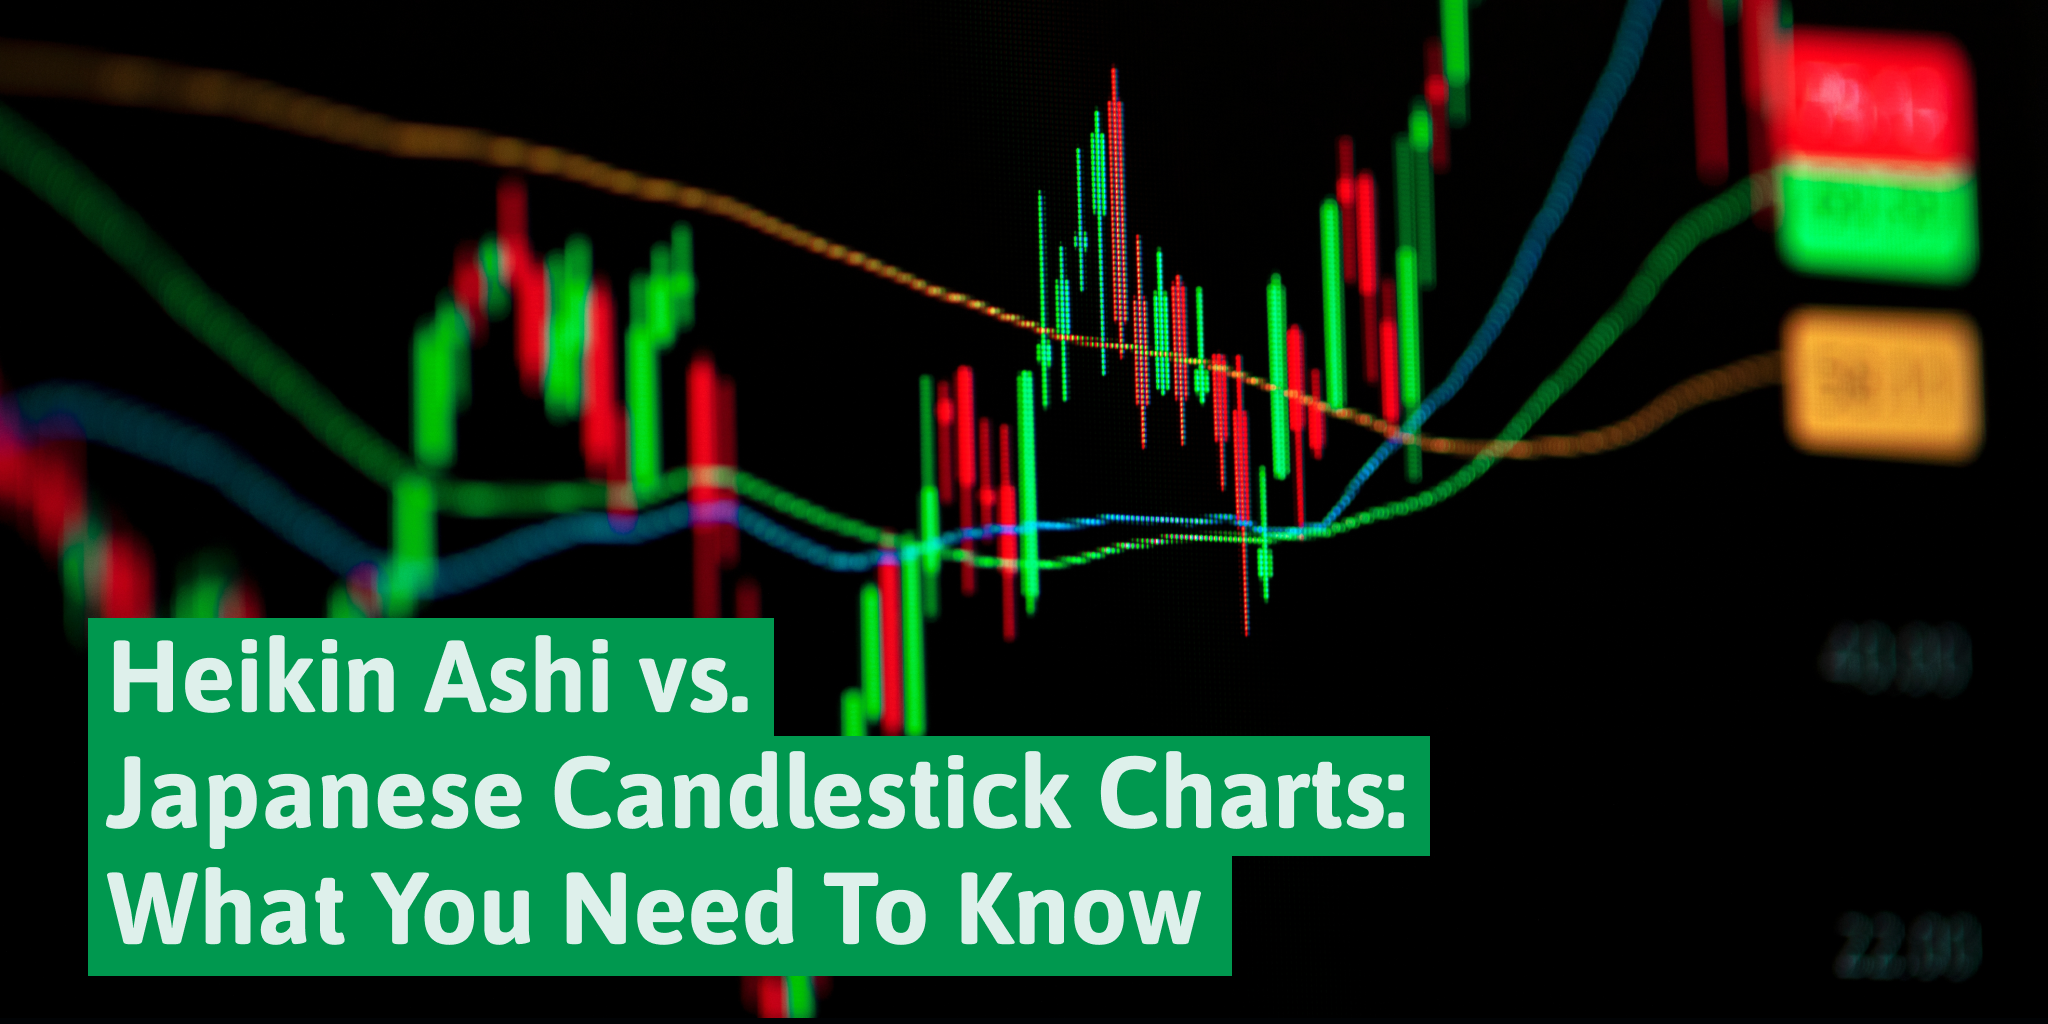 Heikin Ashi vs. Japanese Candlestick Charts: What You Need To Know